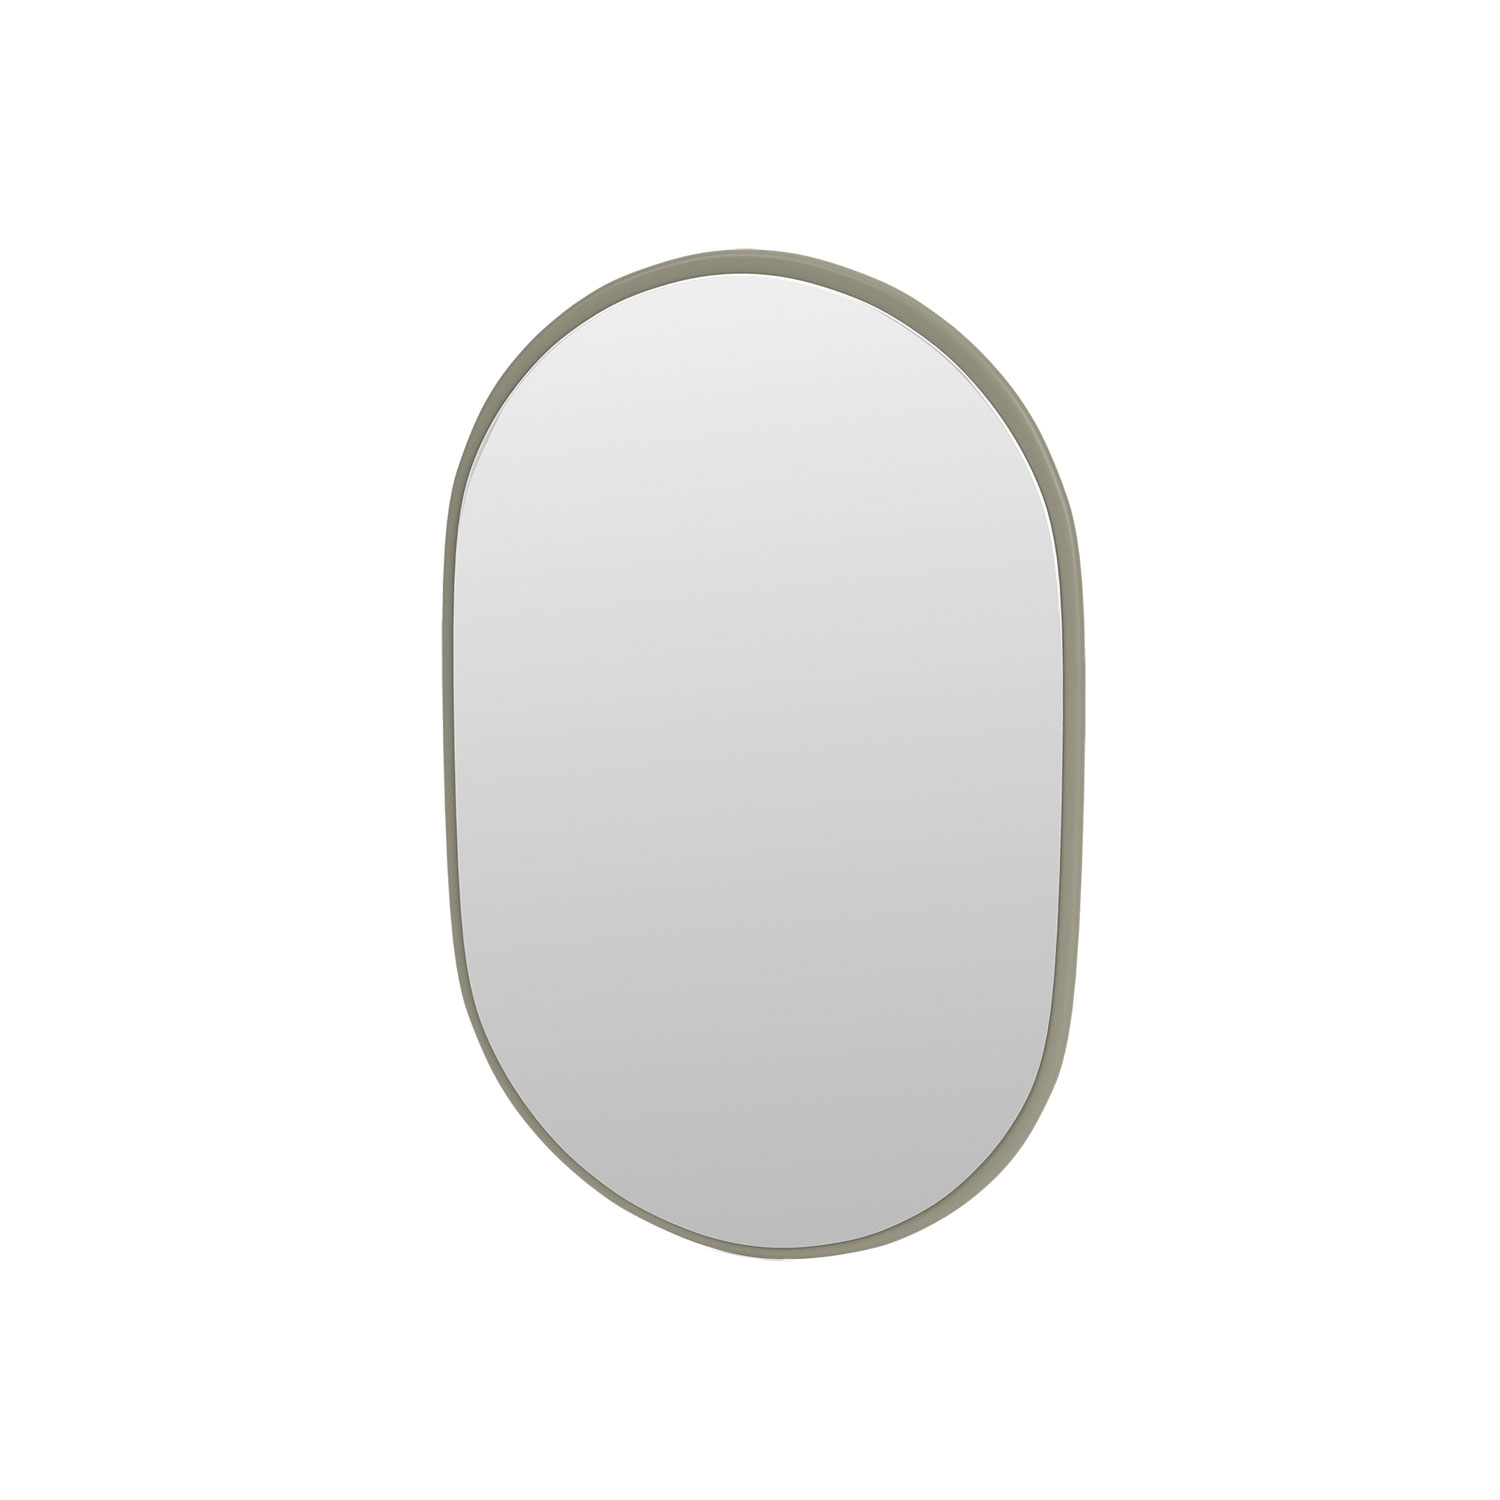 LOOK oval mirror, Fennel